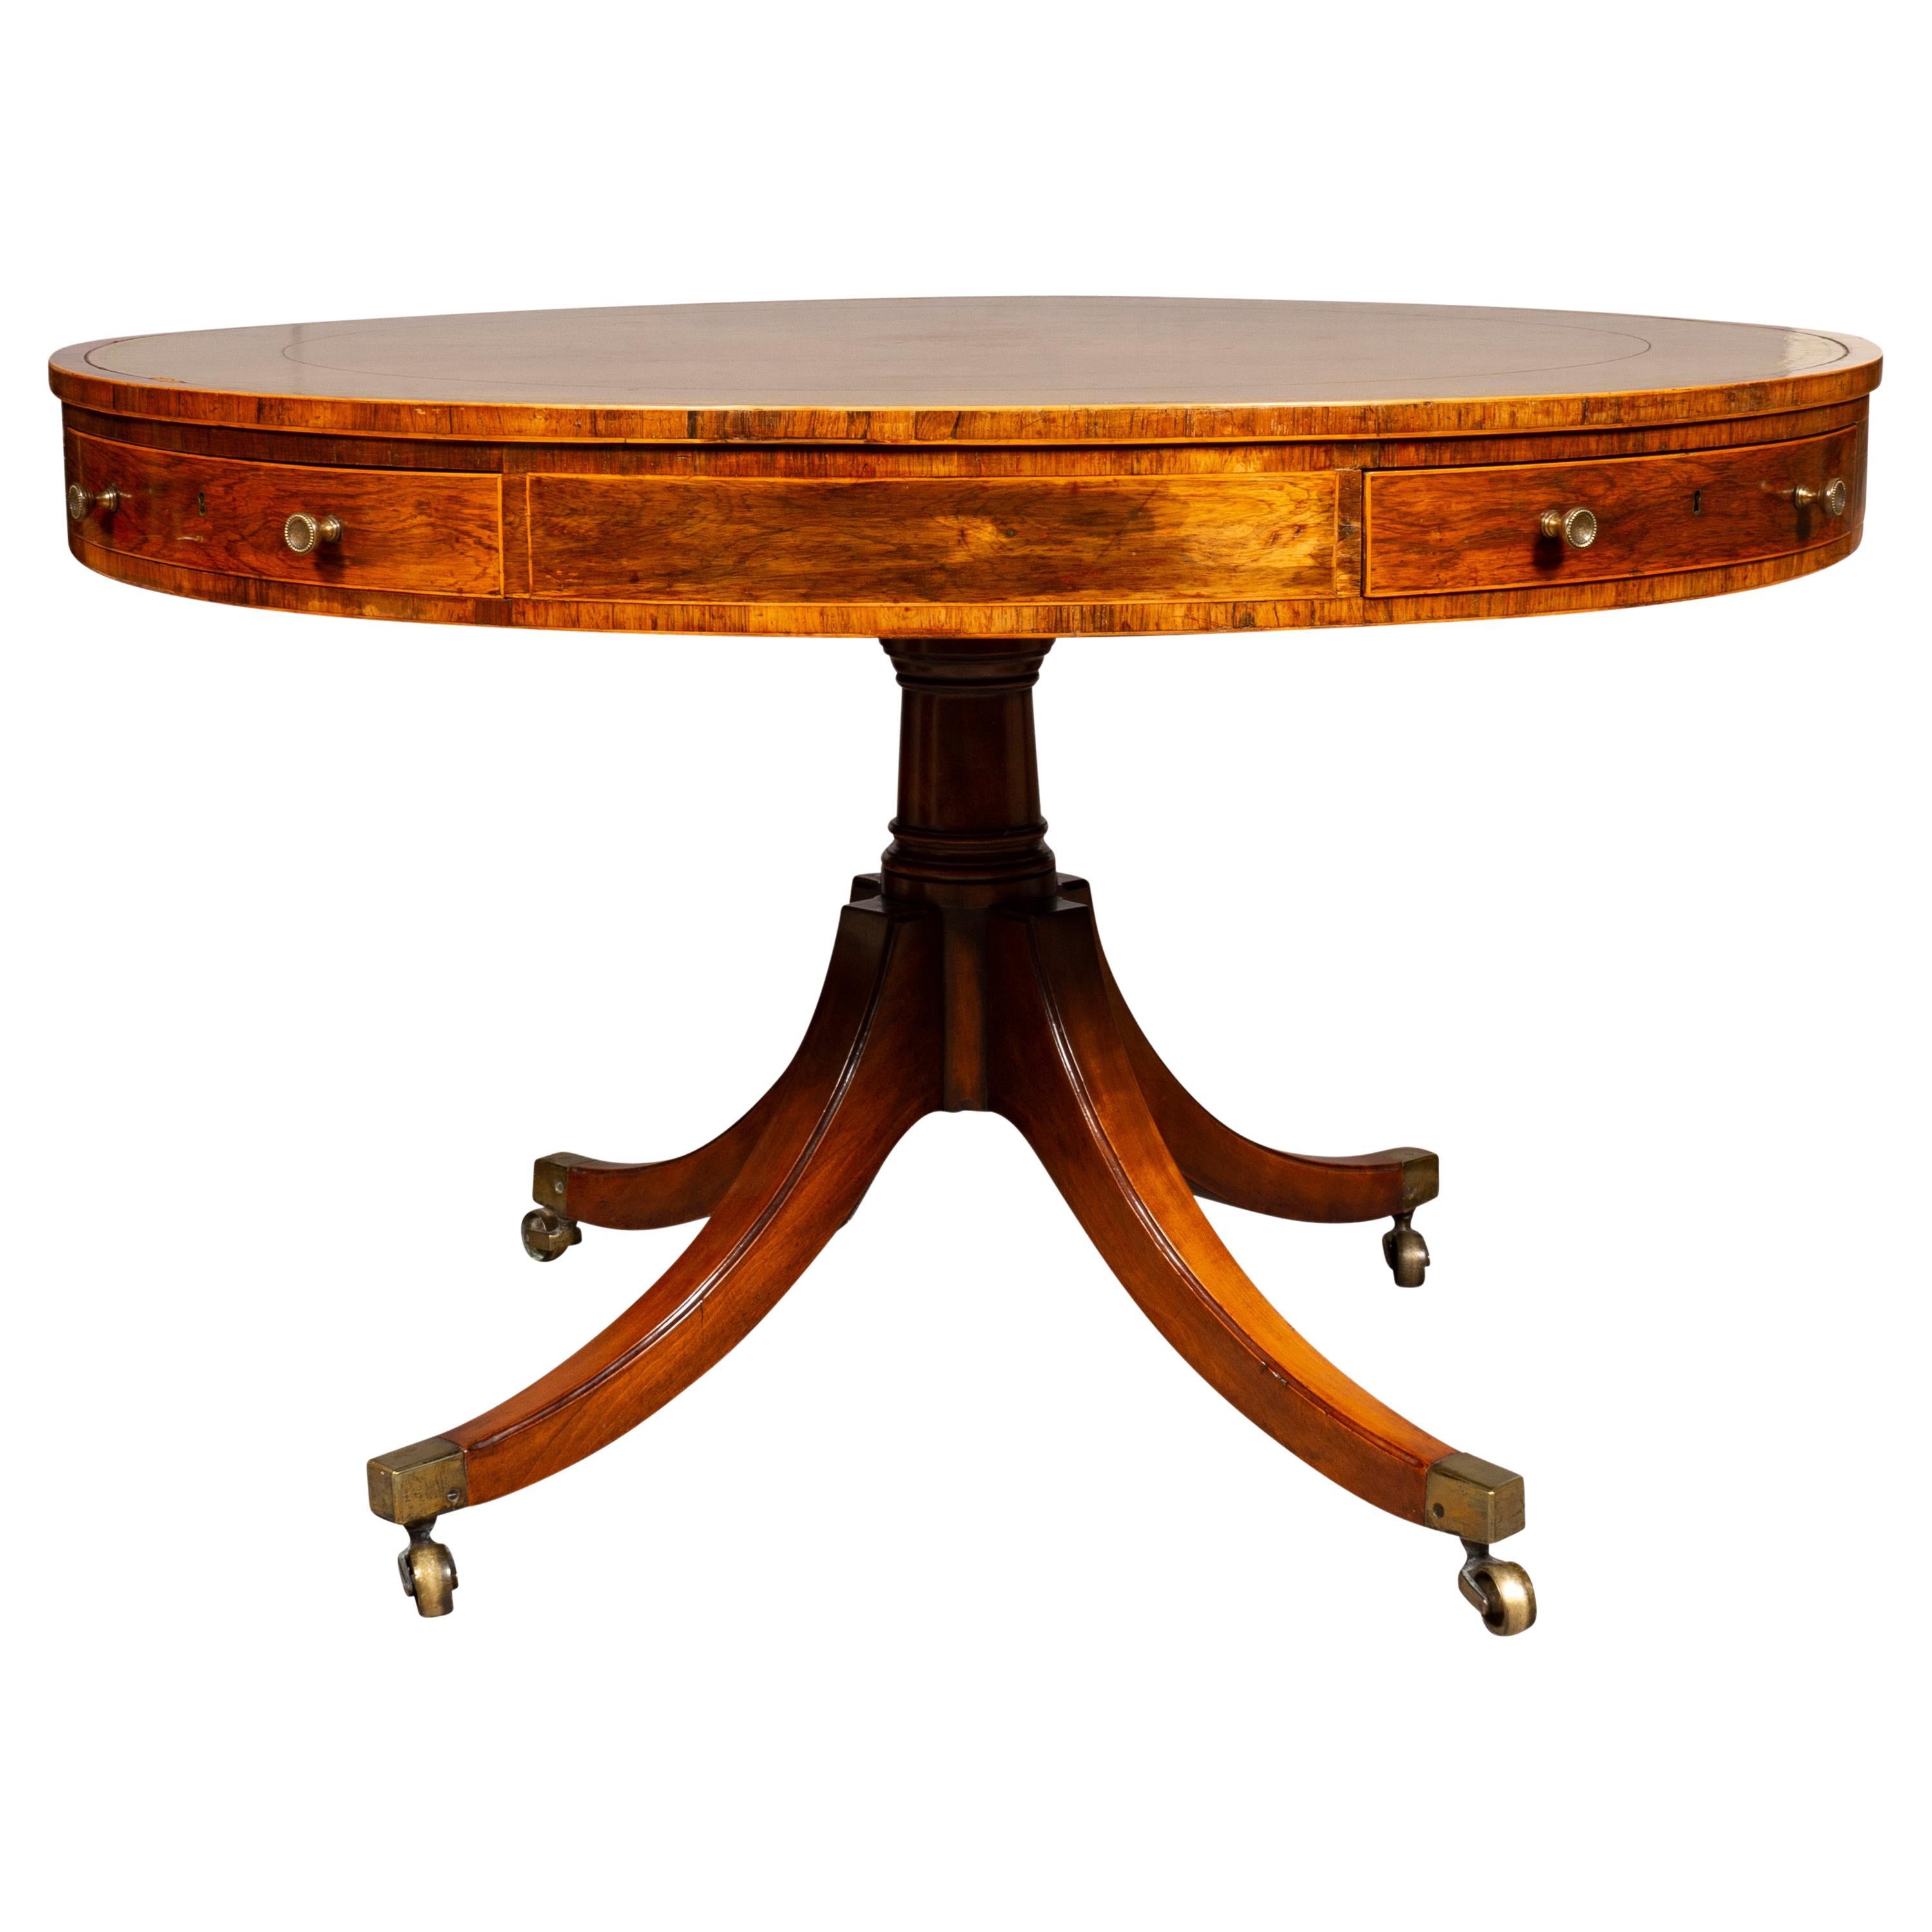 Circular top with inset brown leather within a cross banded edge, conforming frieze with alternating drawers with brass knobs. Raise on a turned support with four saber legs with casters.
Provenance; Supplied to King George IV [1762-1830] when